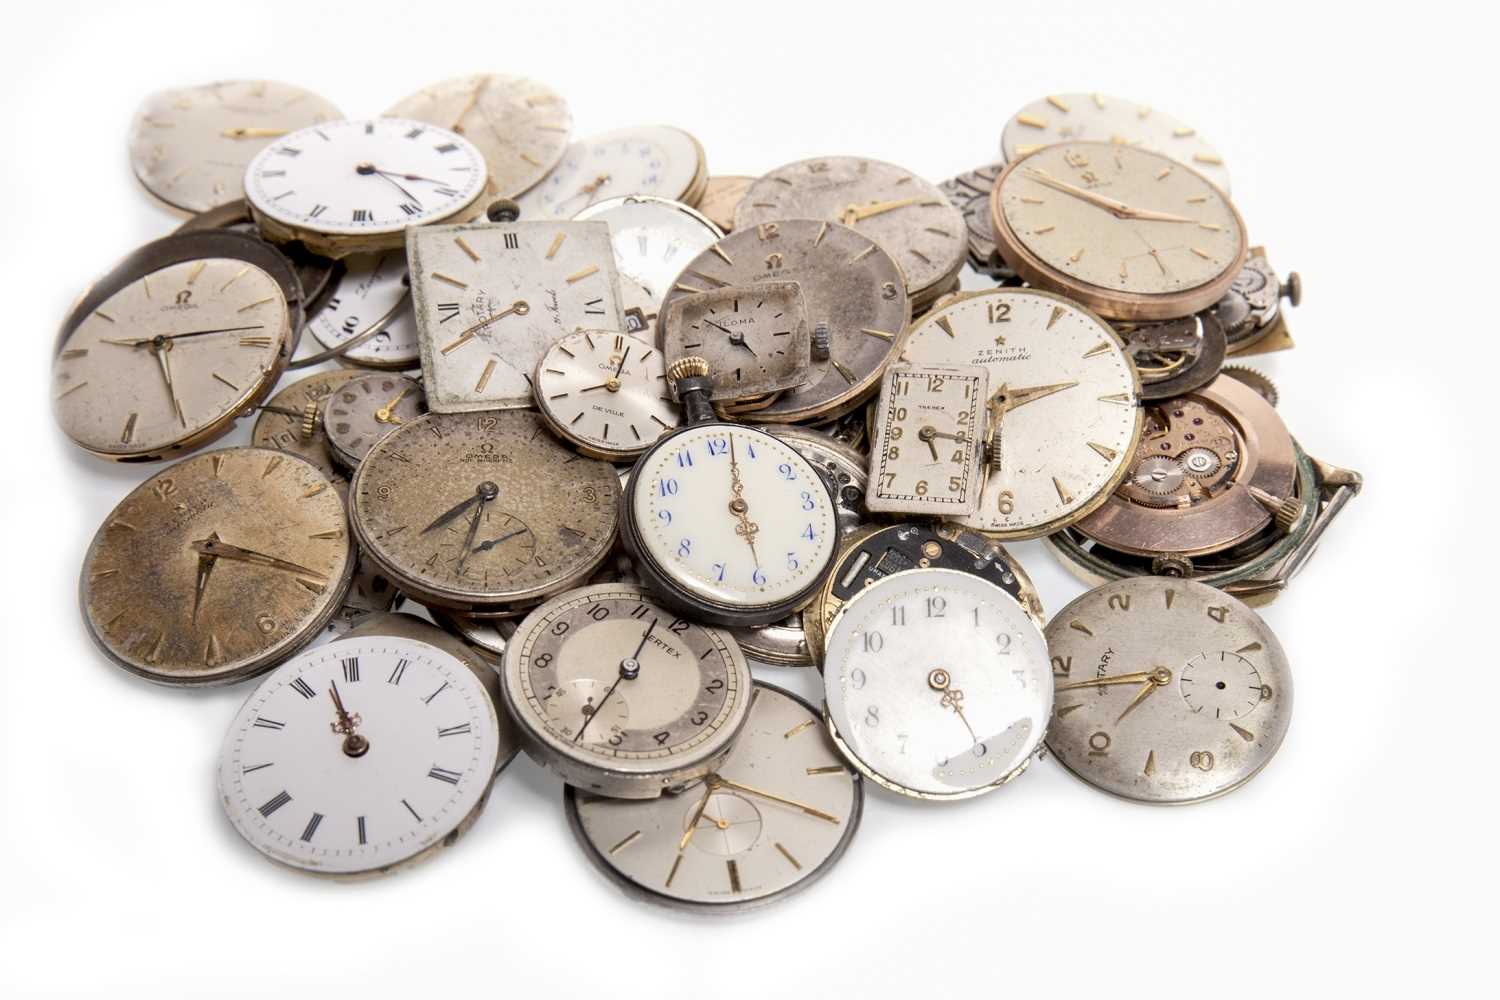 Lot 880 - A LARGE GROUP OF VARIOUS WATCH DIALS AND MOVEMENTS